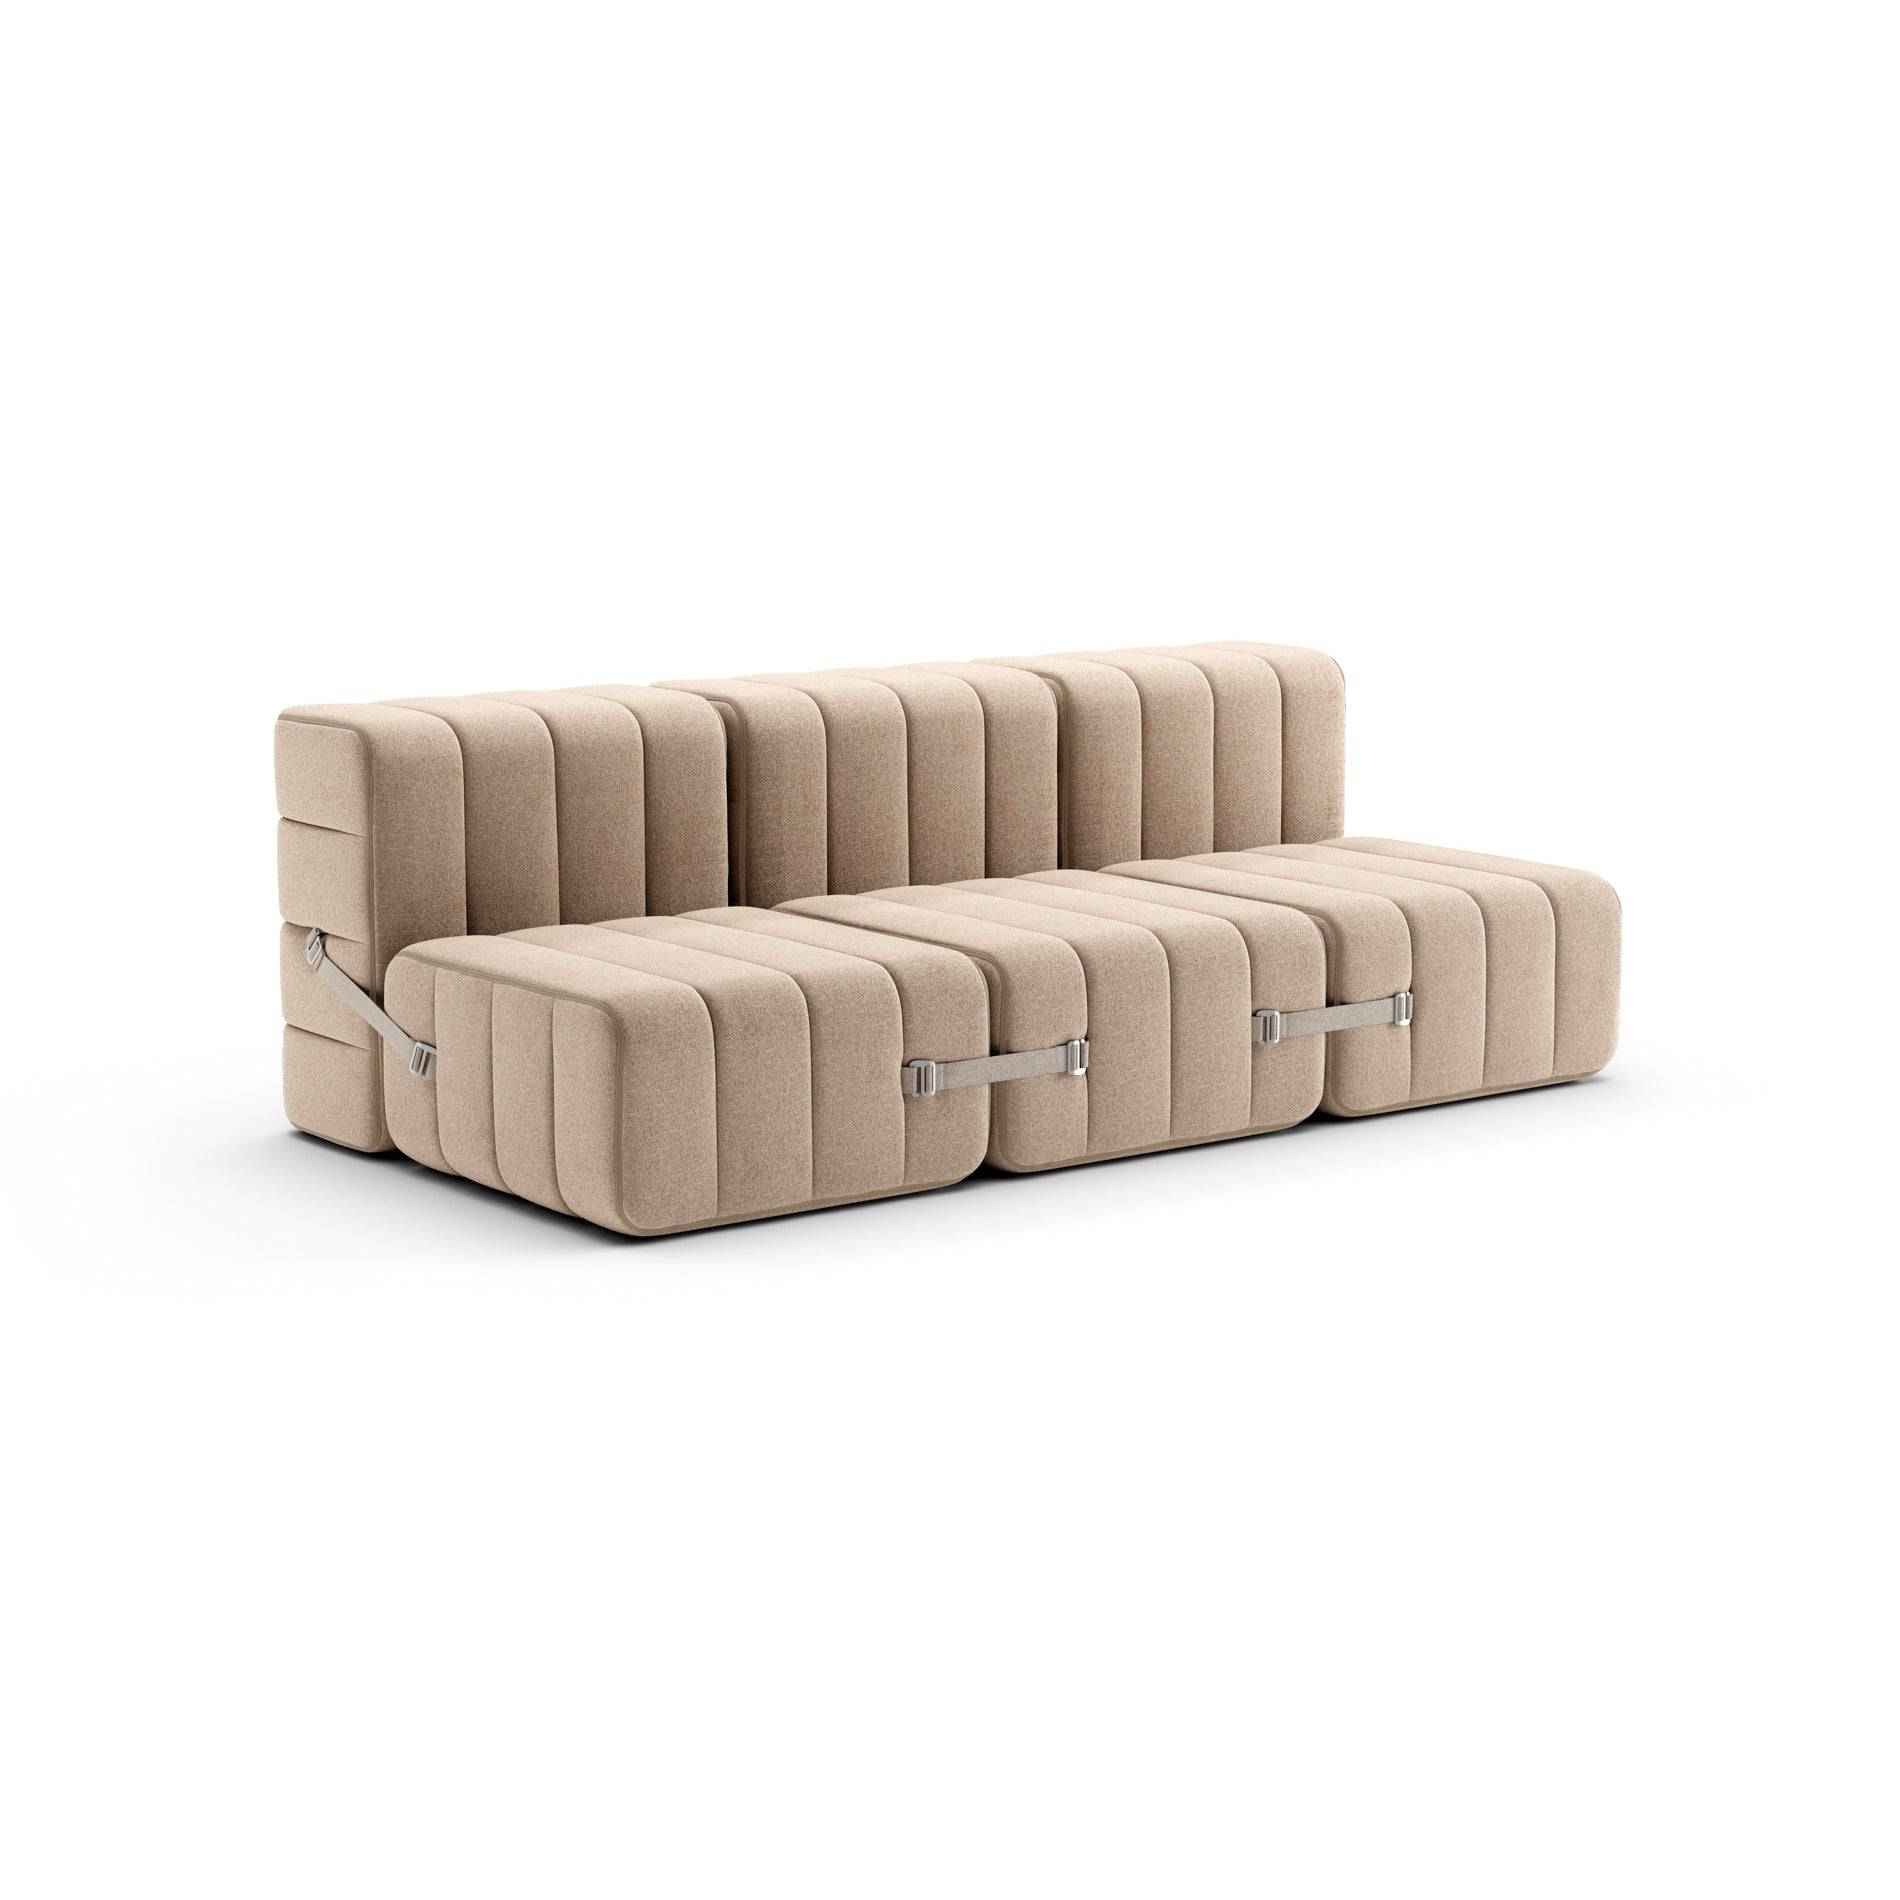 Curt Sofa System - Beige - THAT COOL LIVING